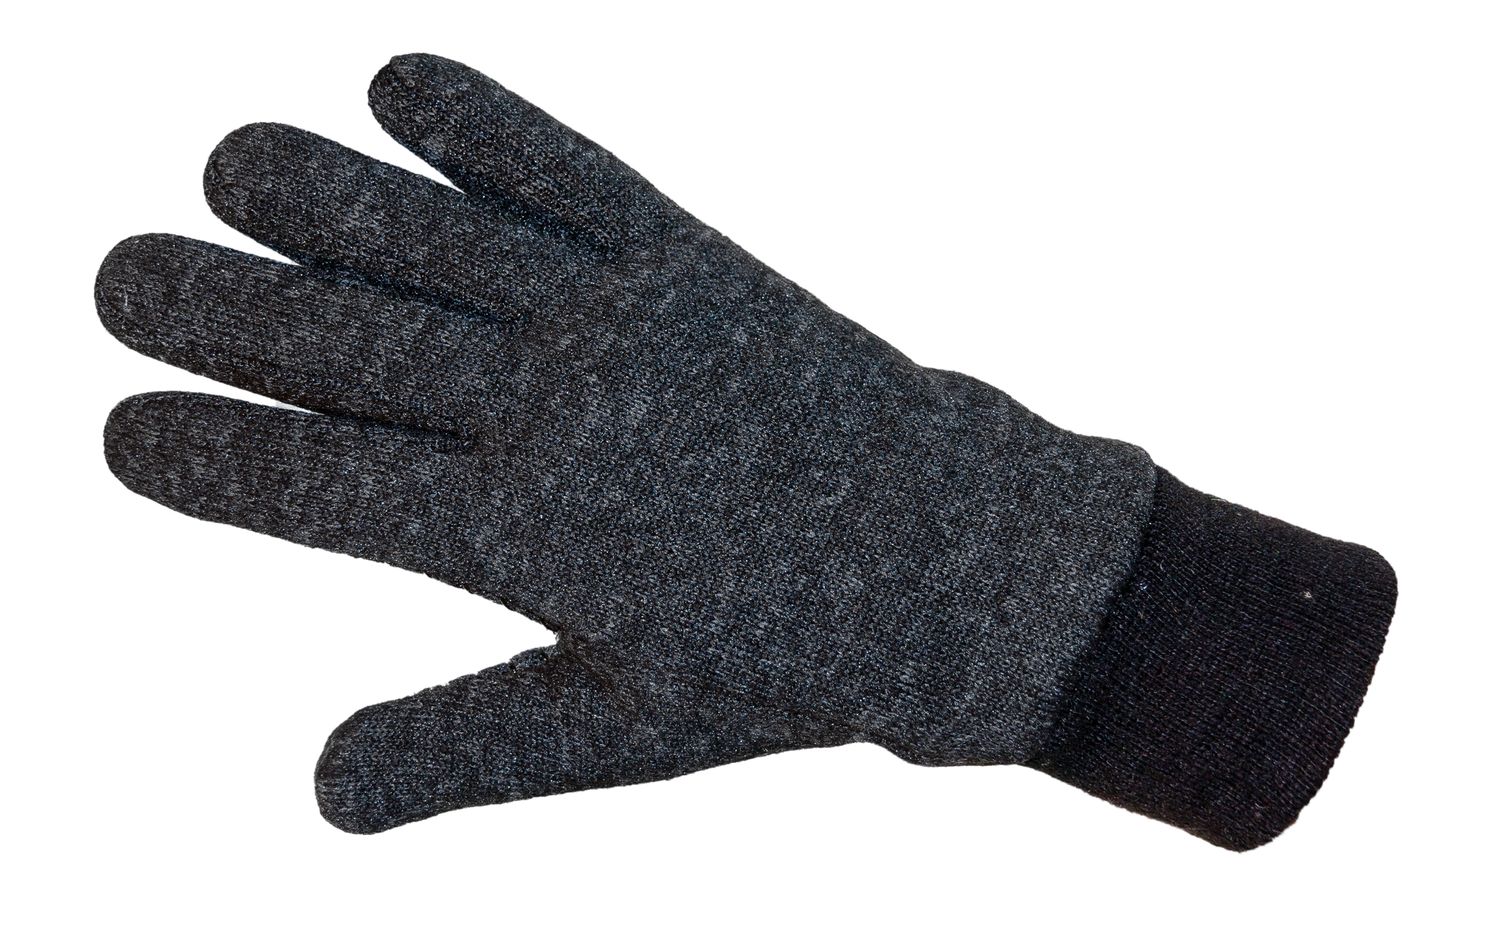 Areco-Outdoor warme Touch Handschuhe mit Isolation-System von Areco